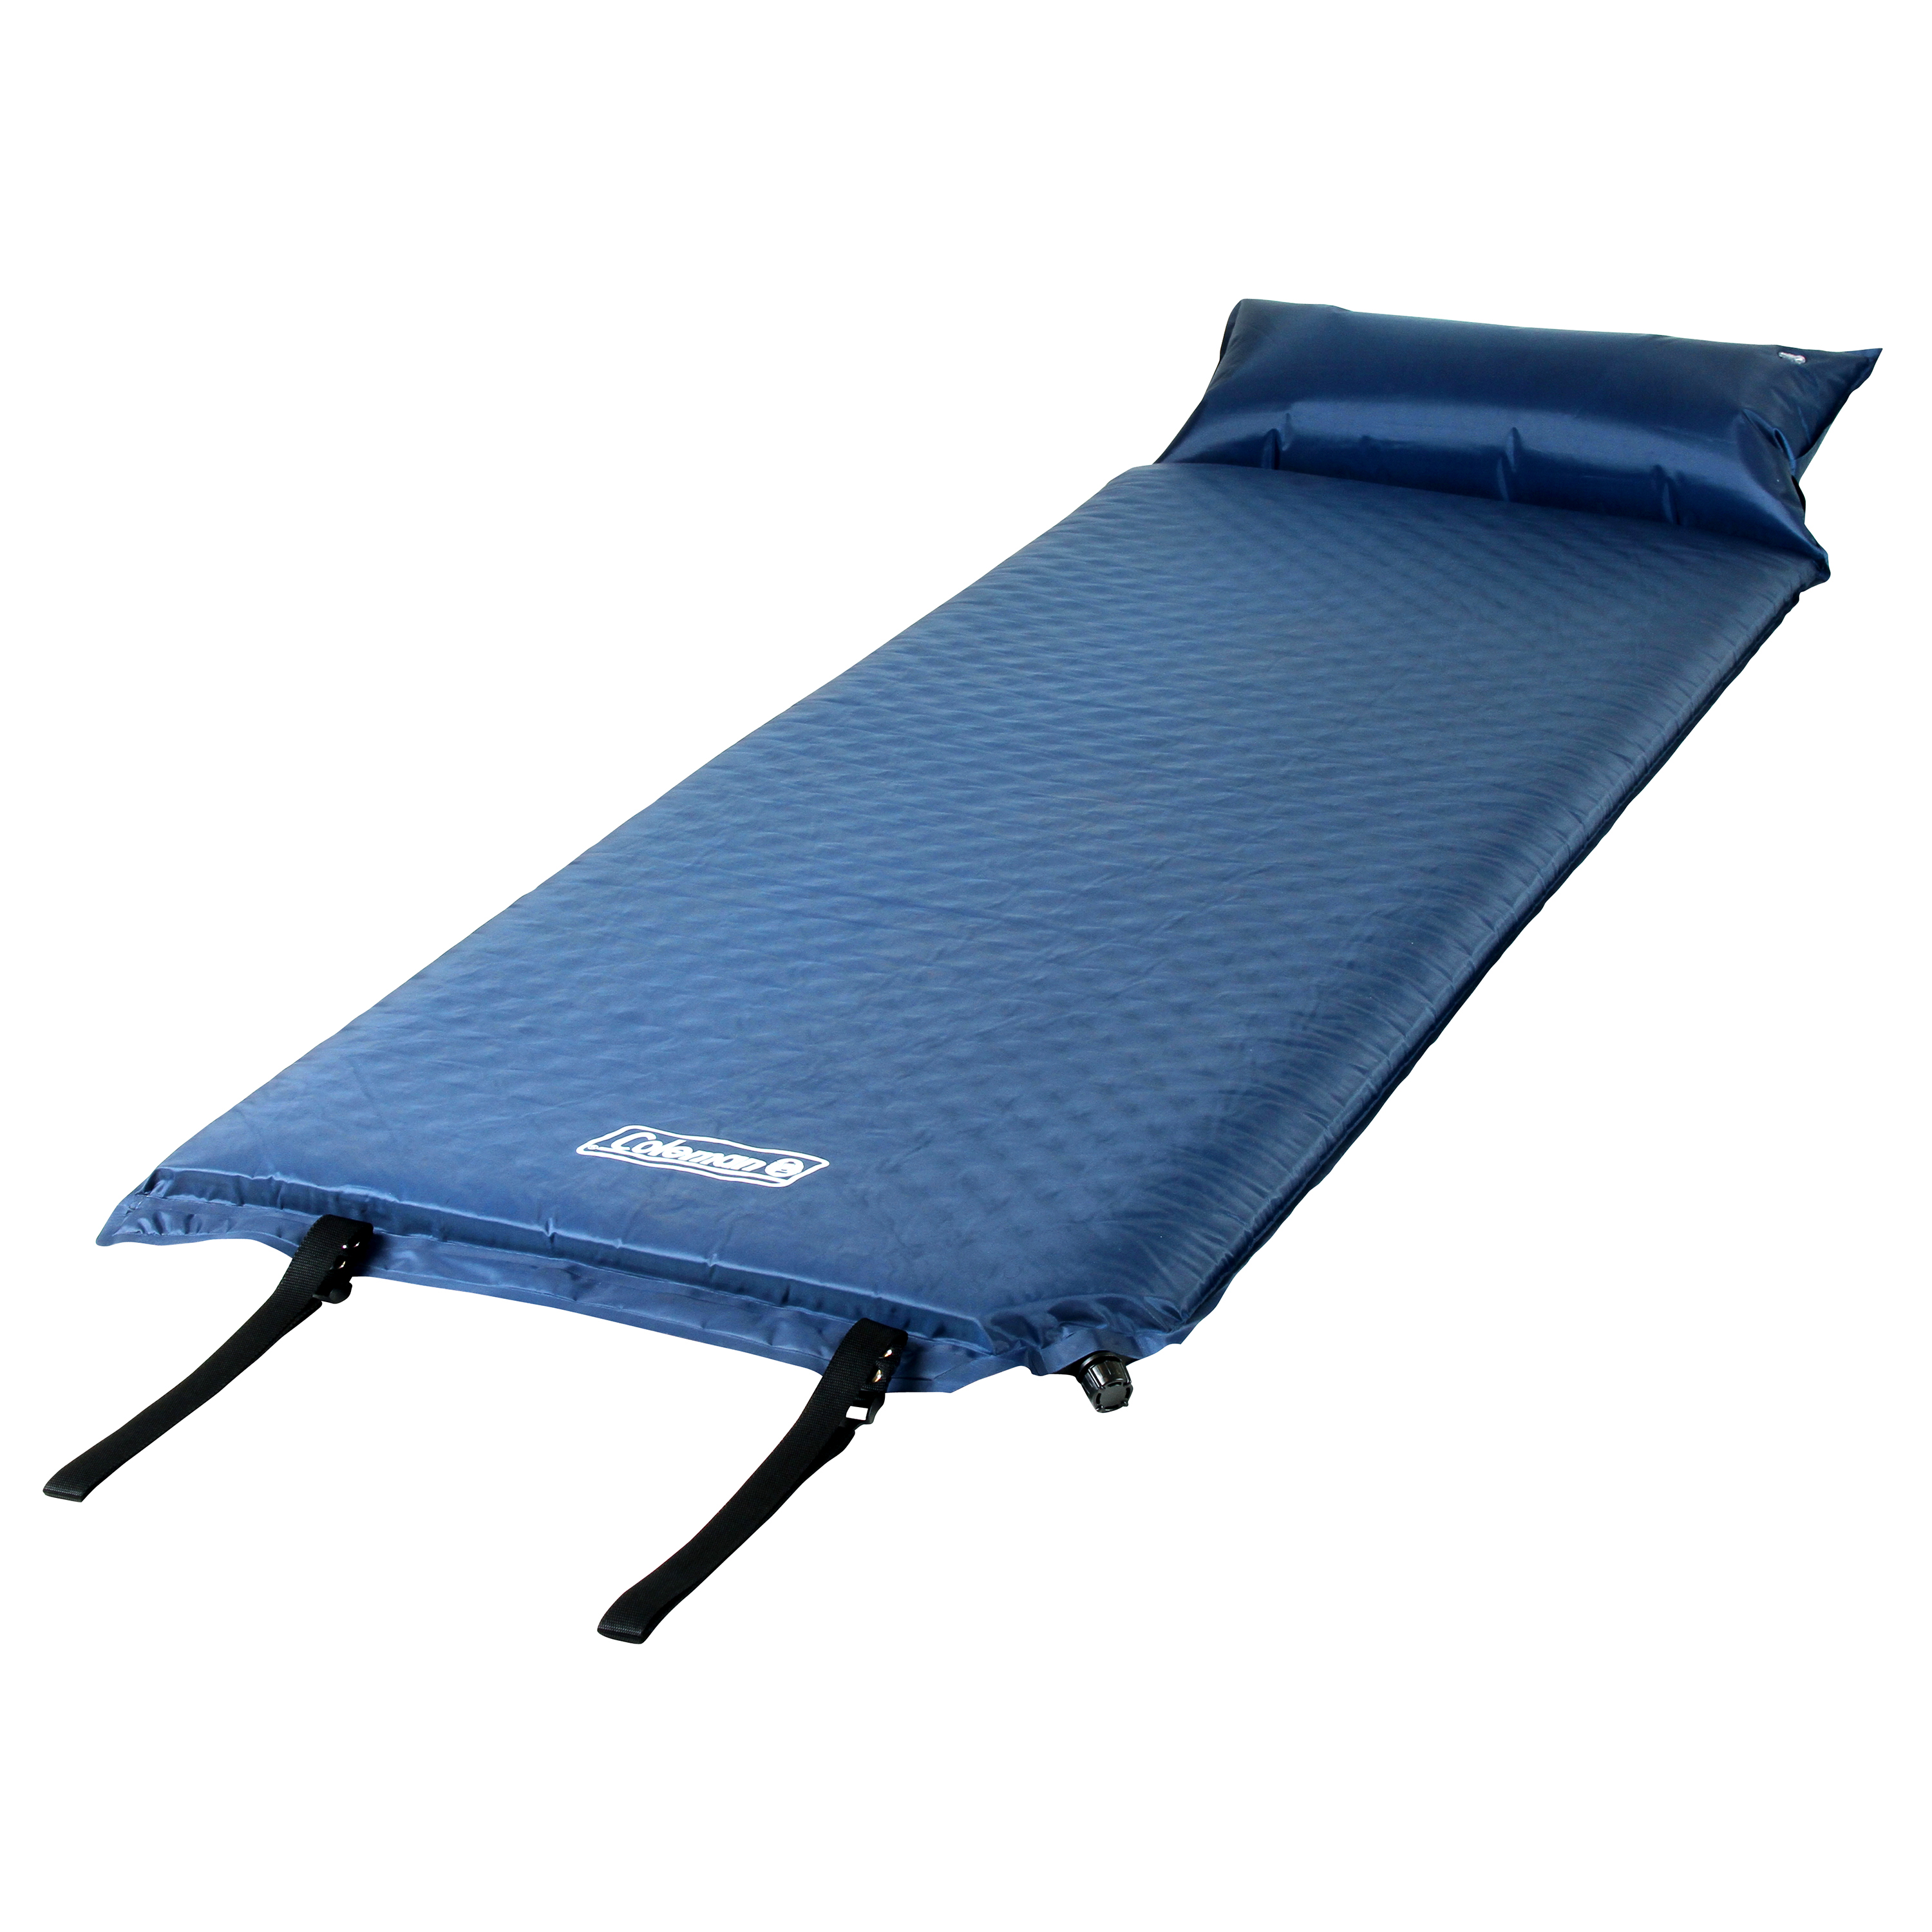 Coleman Self-Inflating Sleeping Camp Pad with Pillow, 76" x 25" - image 1 of 6